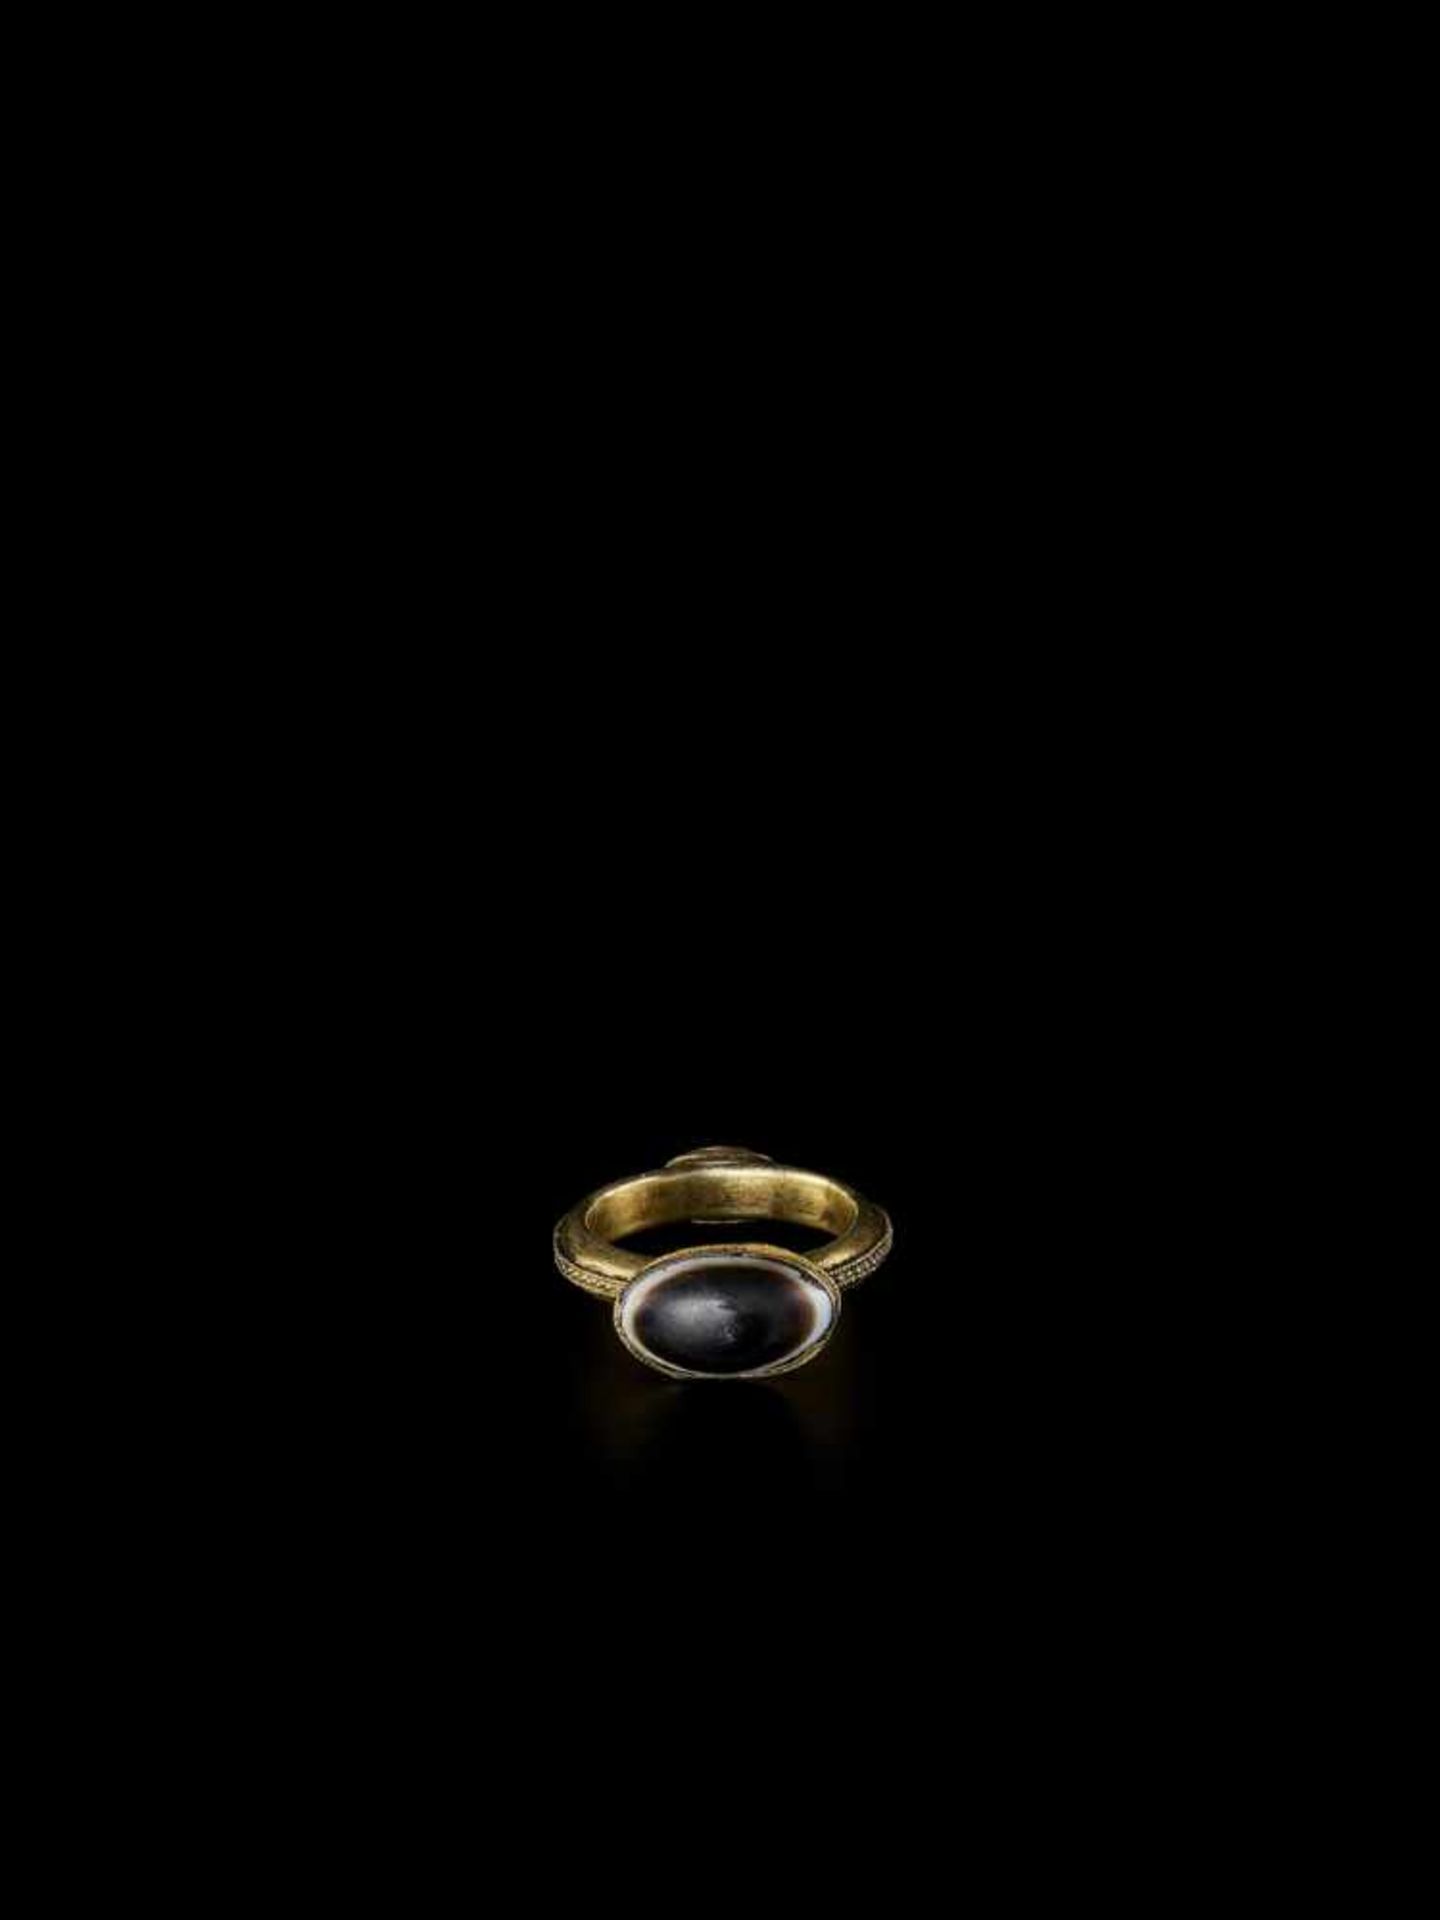 AN ATTRACTIVE GOLD RING WITH EYE AGATE Pakistan, 19th – 20th century. The ring top set with an agate